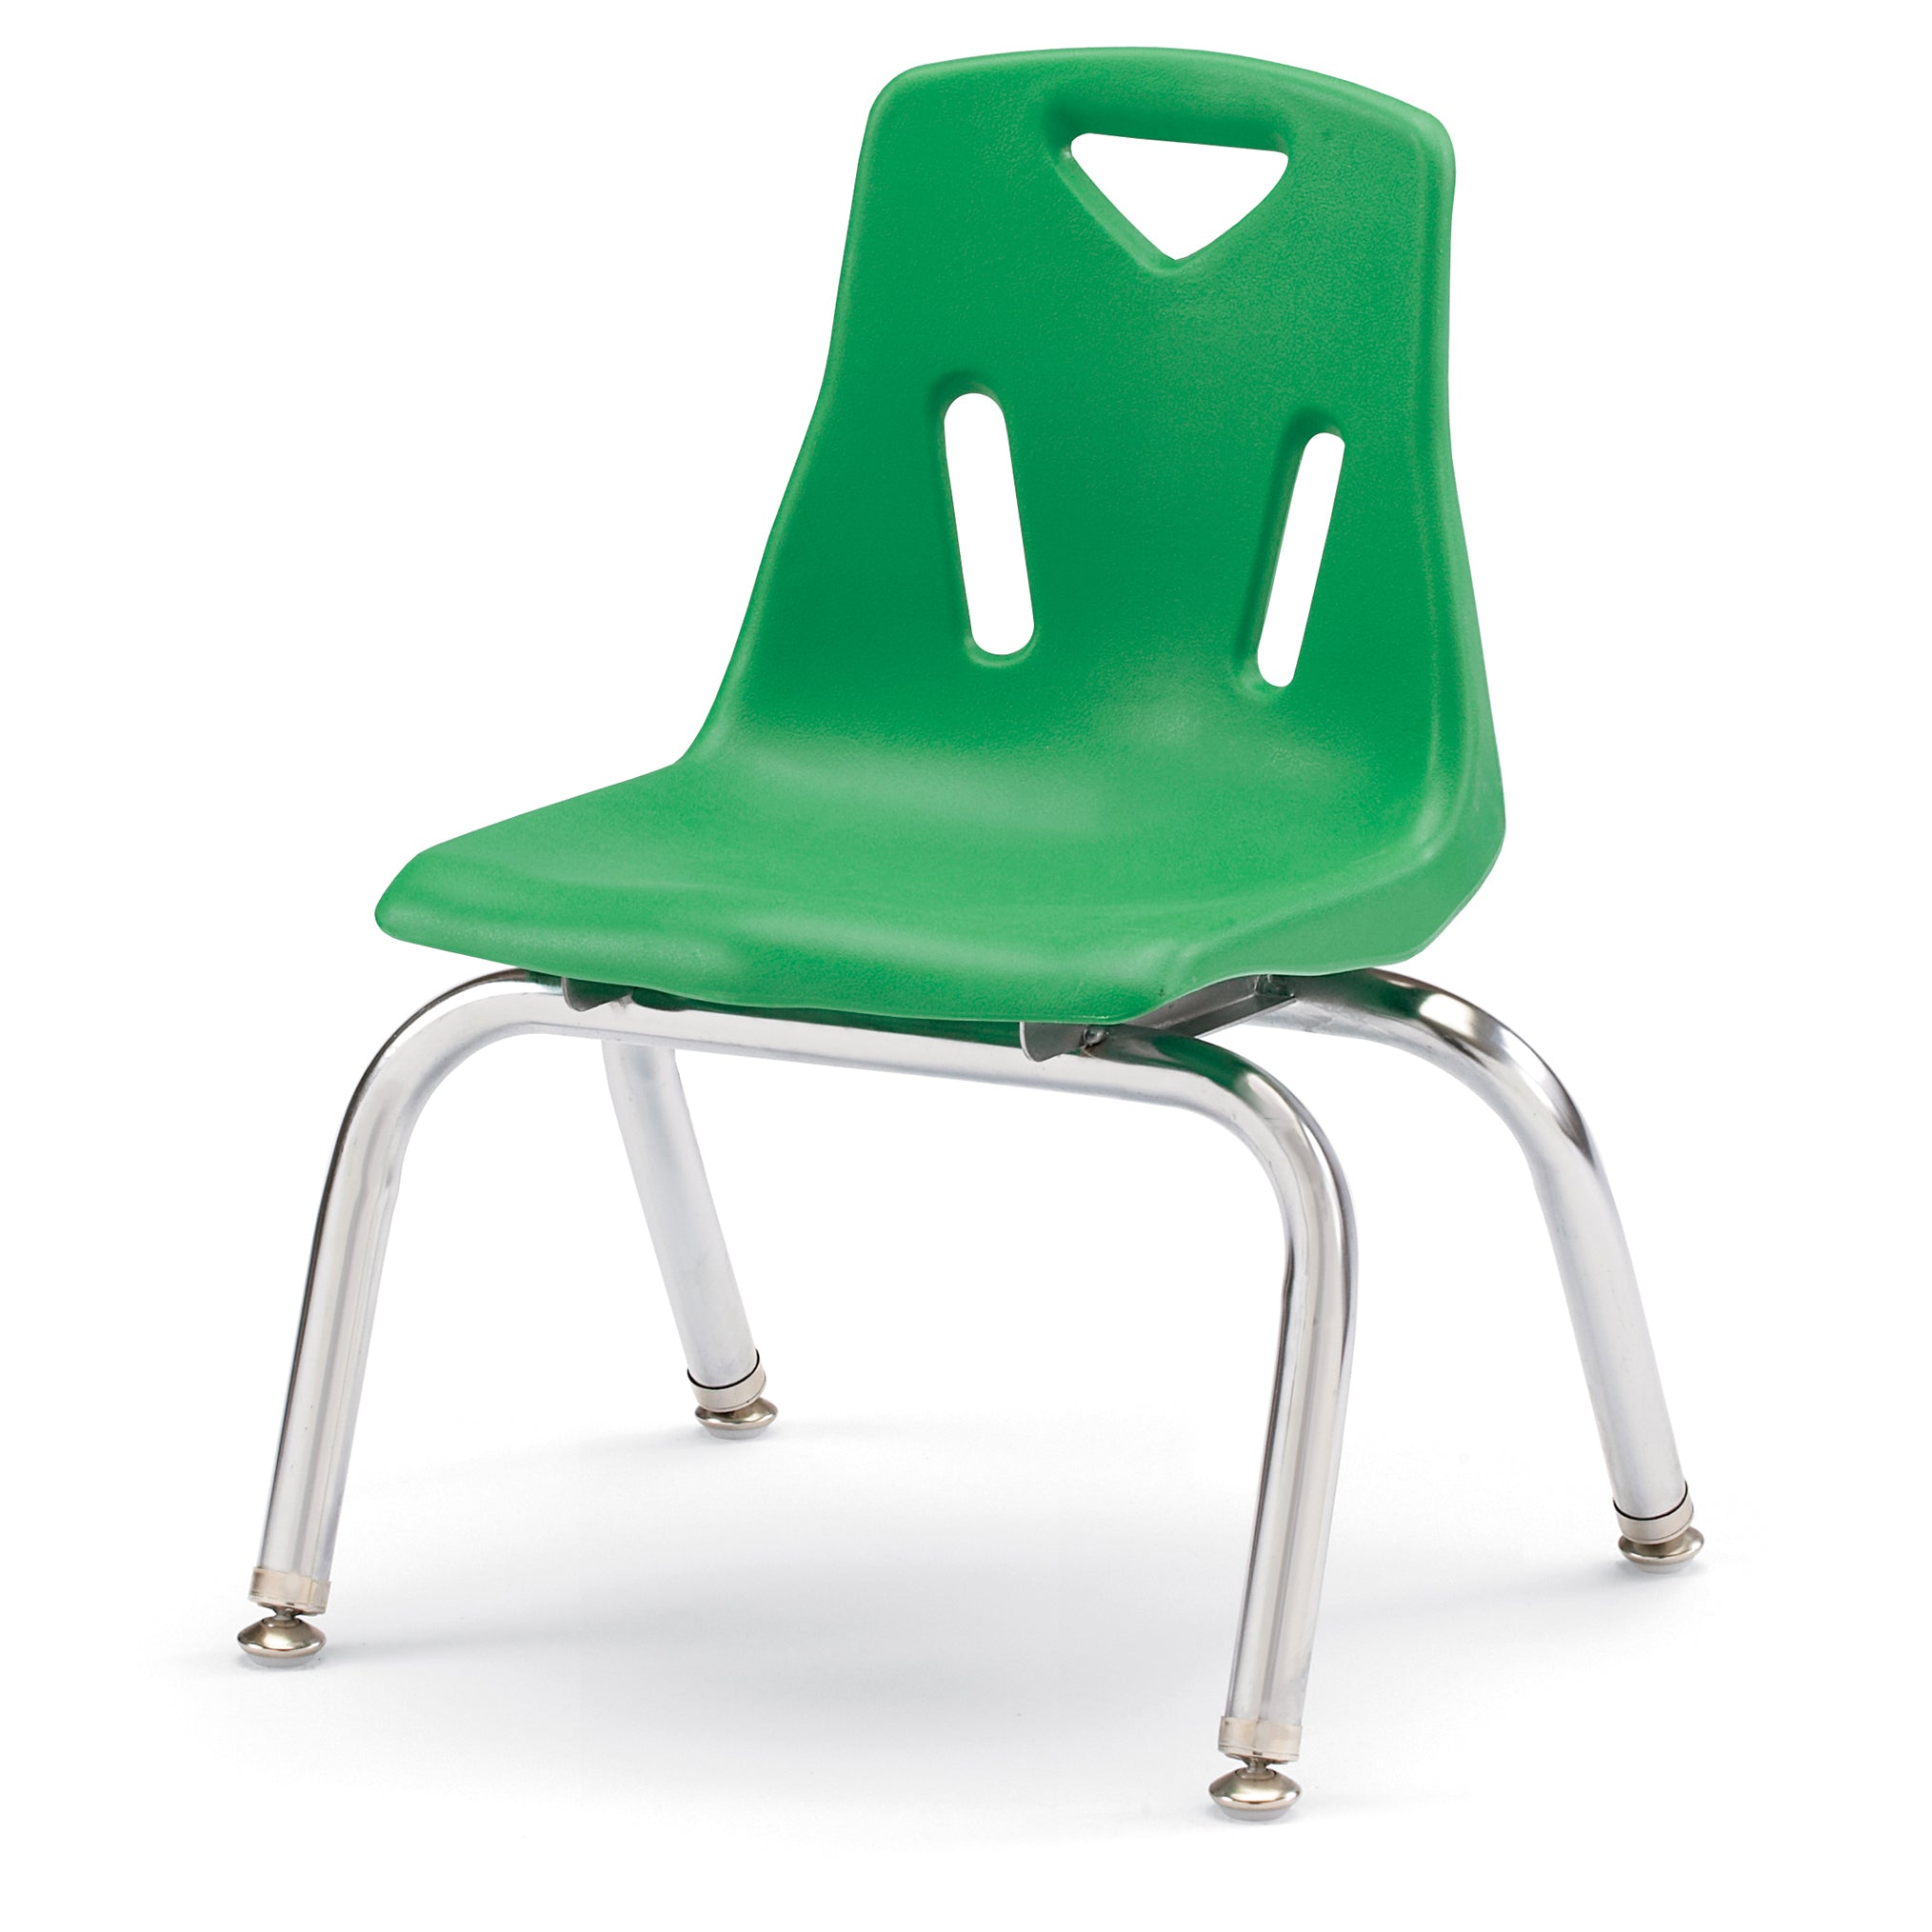 8140JC1119, Berries Stacking Chair with Chrome-Plated Legs - 10" Ht - Green